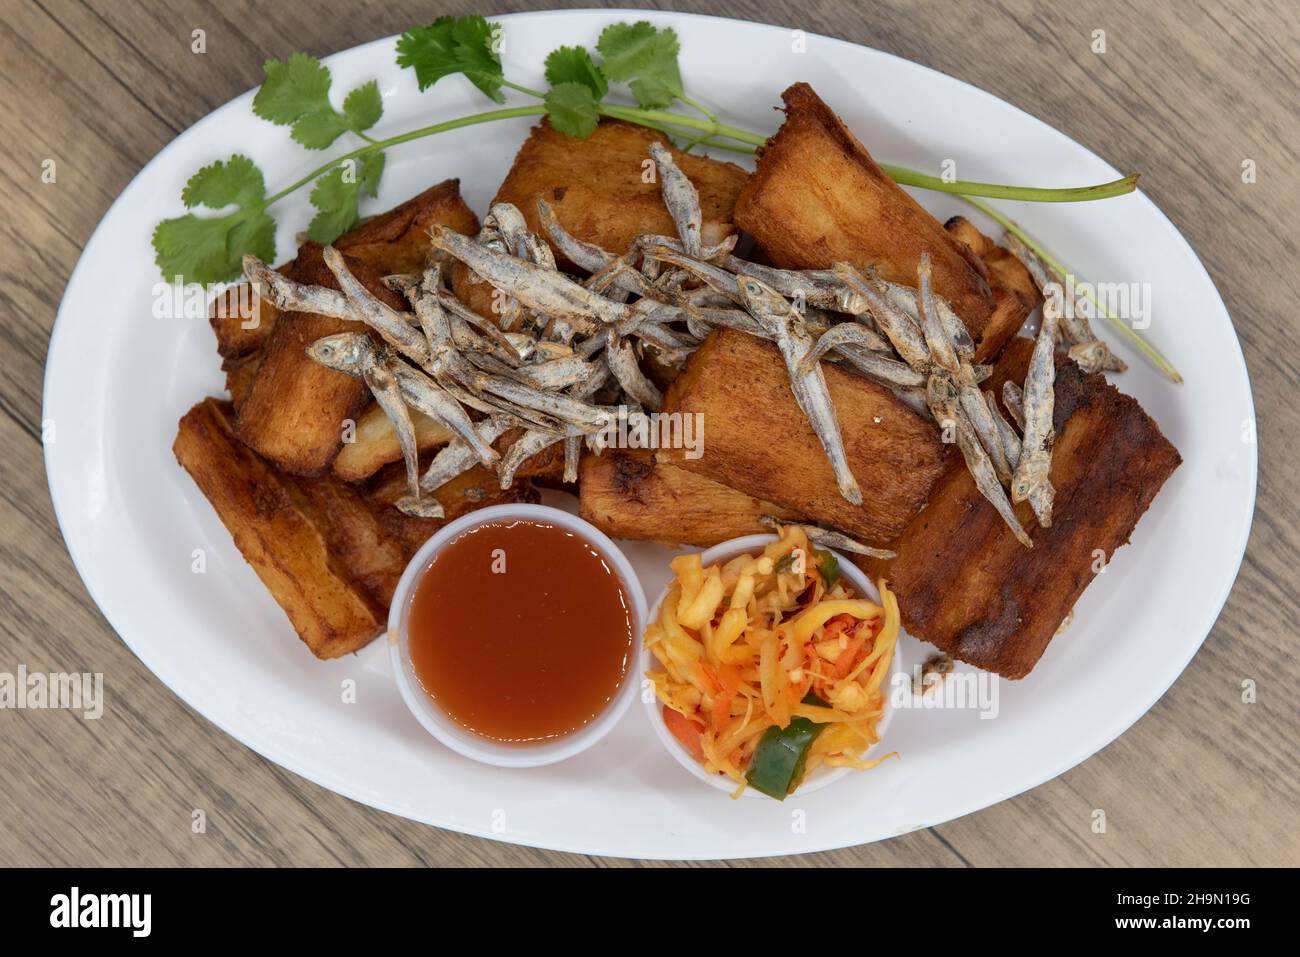 Overhead view of fried Yucca root with garnished with dried fish and dipping sauce for a Latino food delight. Stock Photo